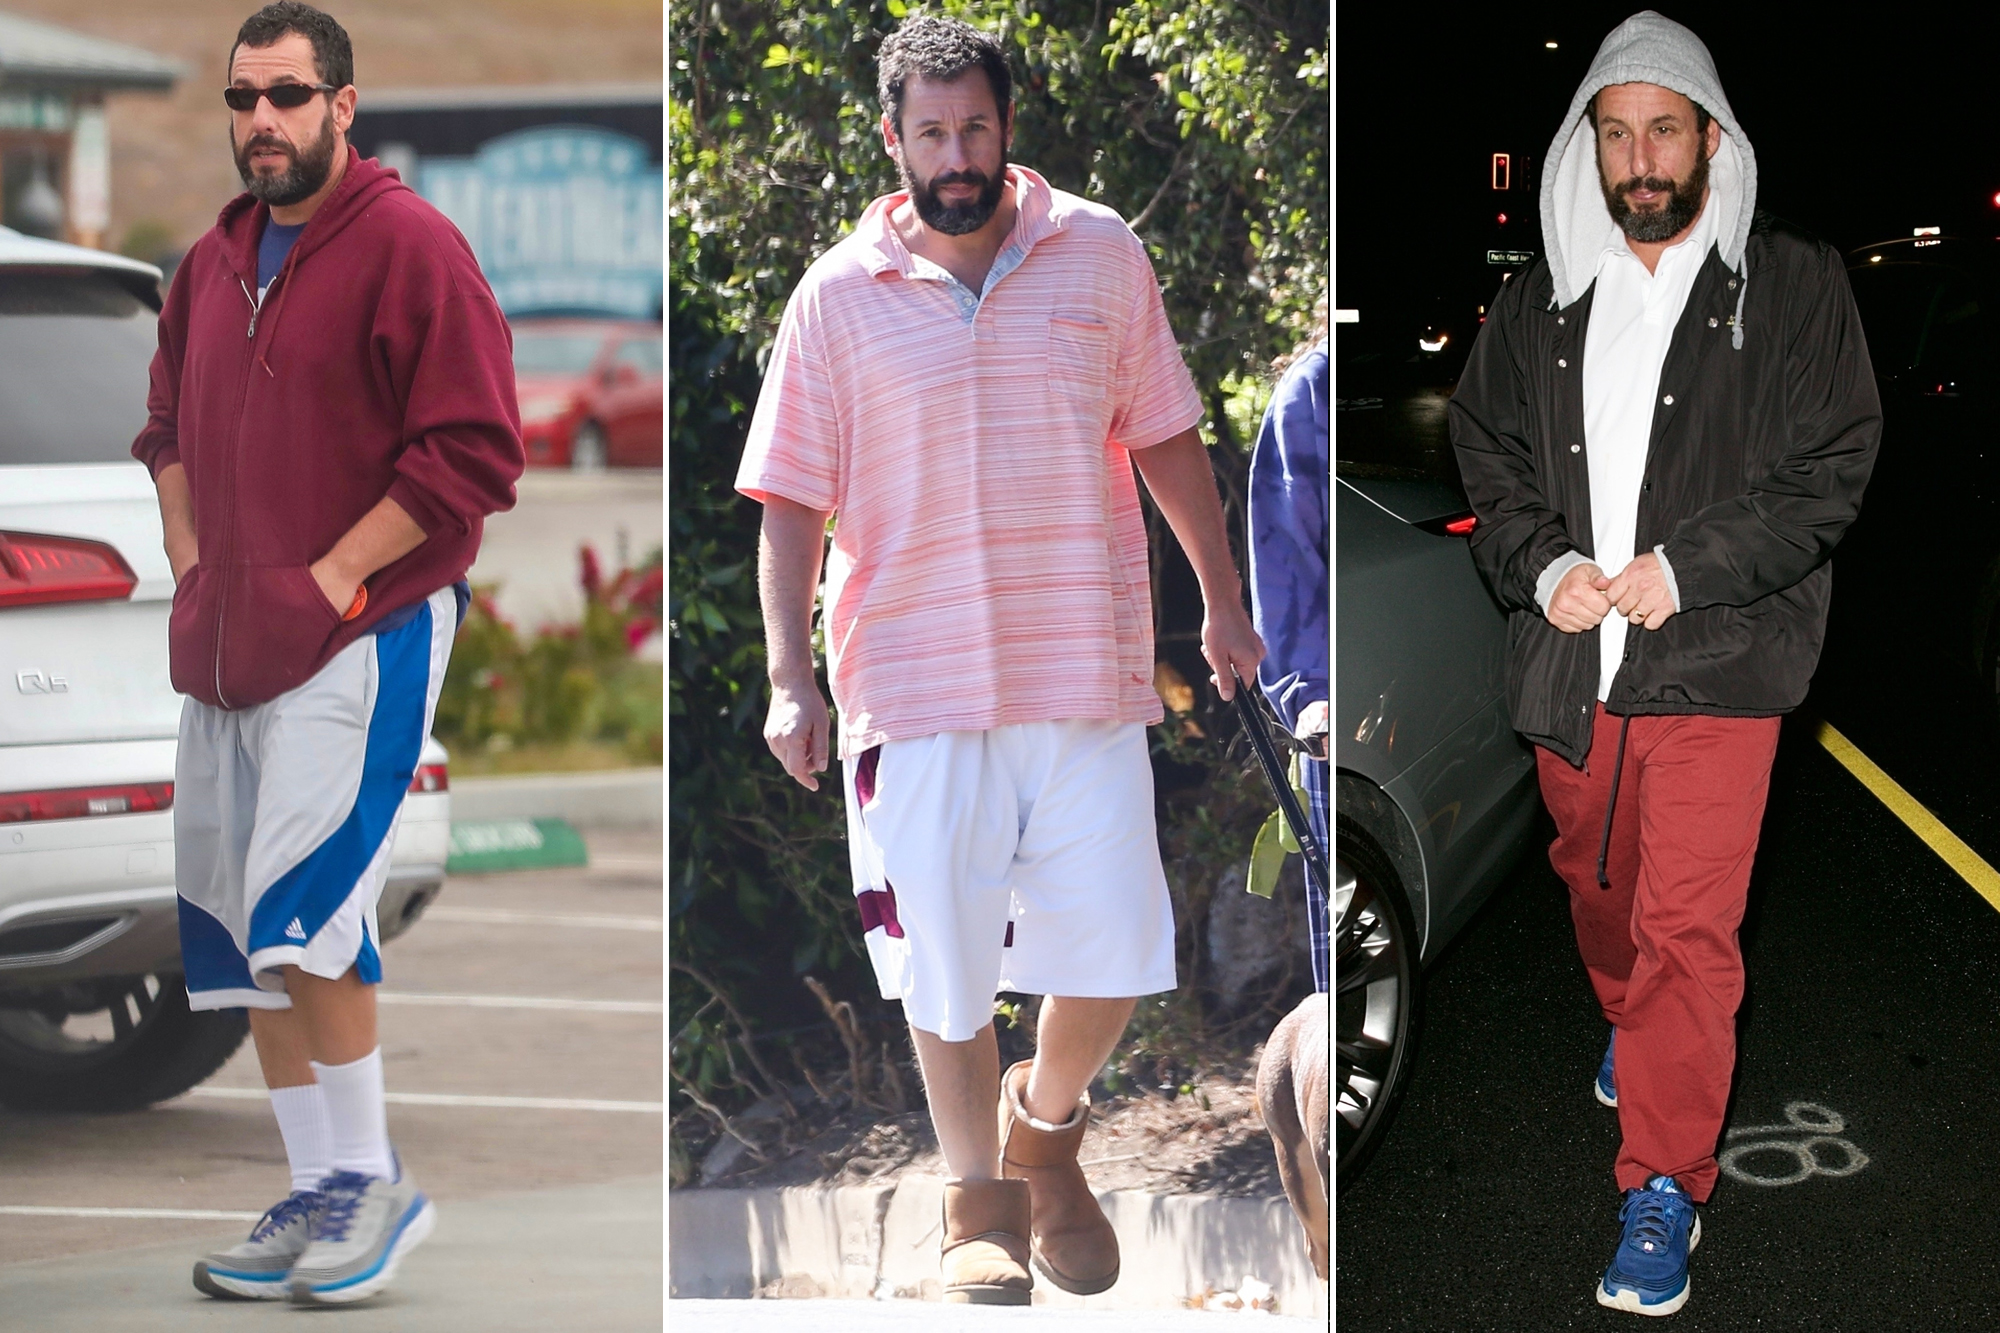 Adam Sandler Is A Fashion Icon-It's Time We Accept It - NYCTastemakers